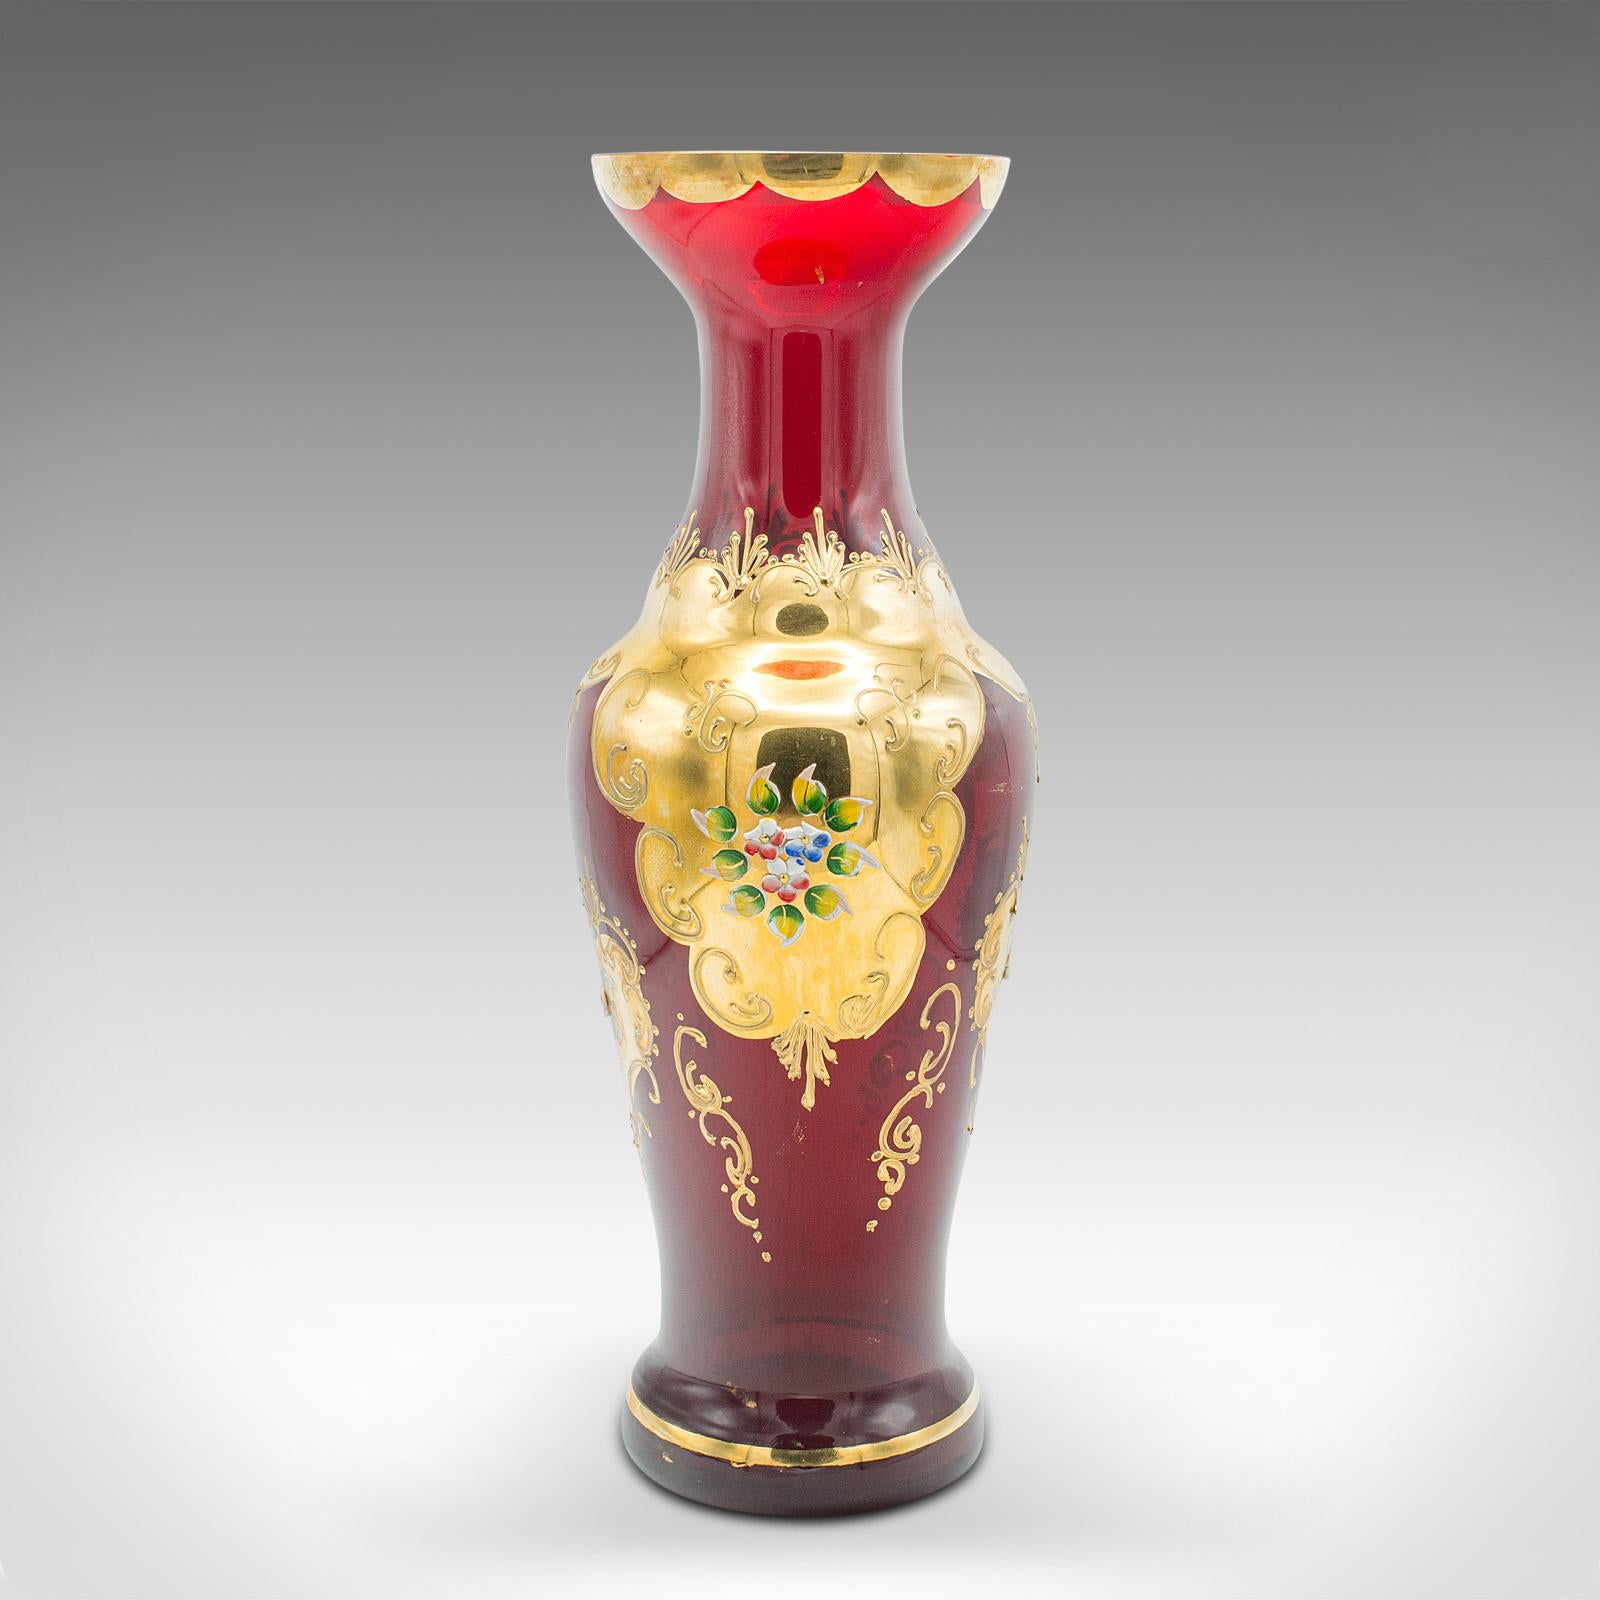 This is a vintage Venetian show vase. An Italian, art glass and gilt finished decorative flower urn, dating to the late 20th century, circa 1970.

Of eye-catching form with great colour and finish
Displays a desirable aged patina and in good